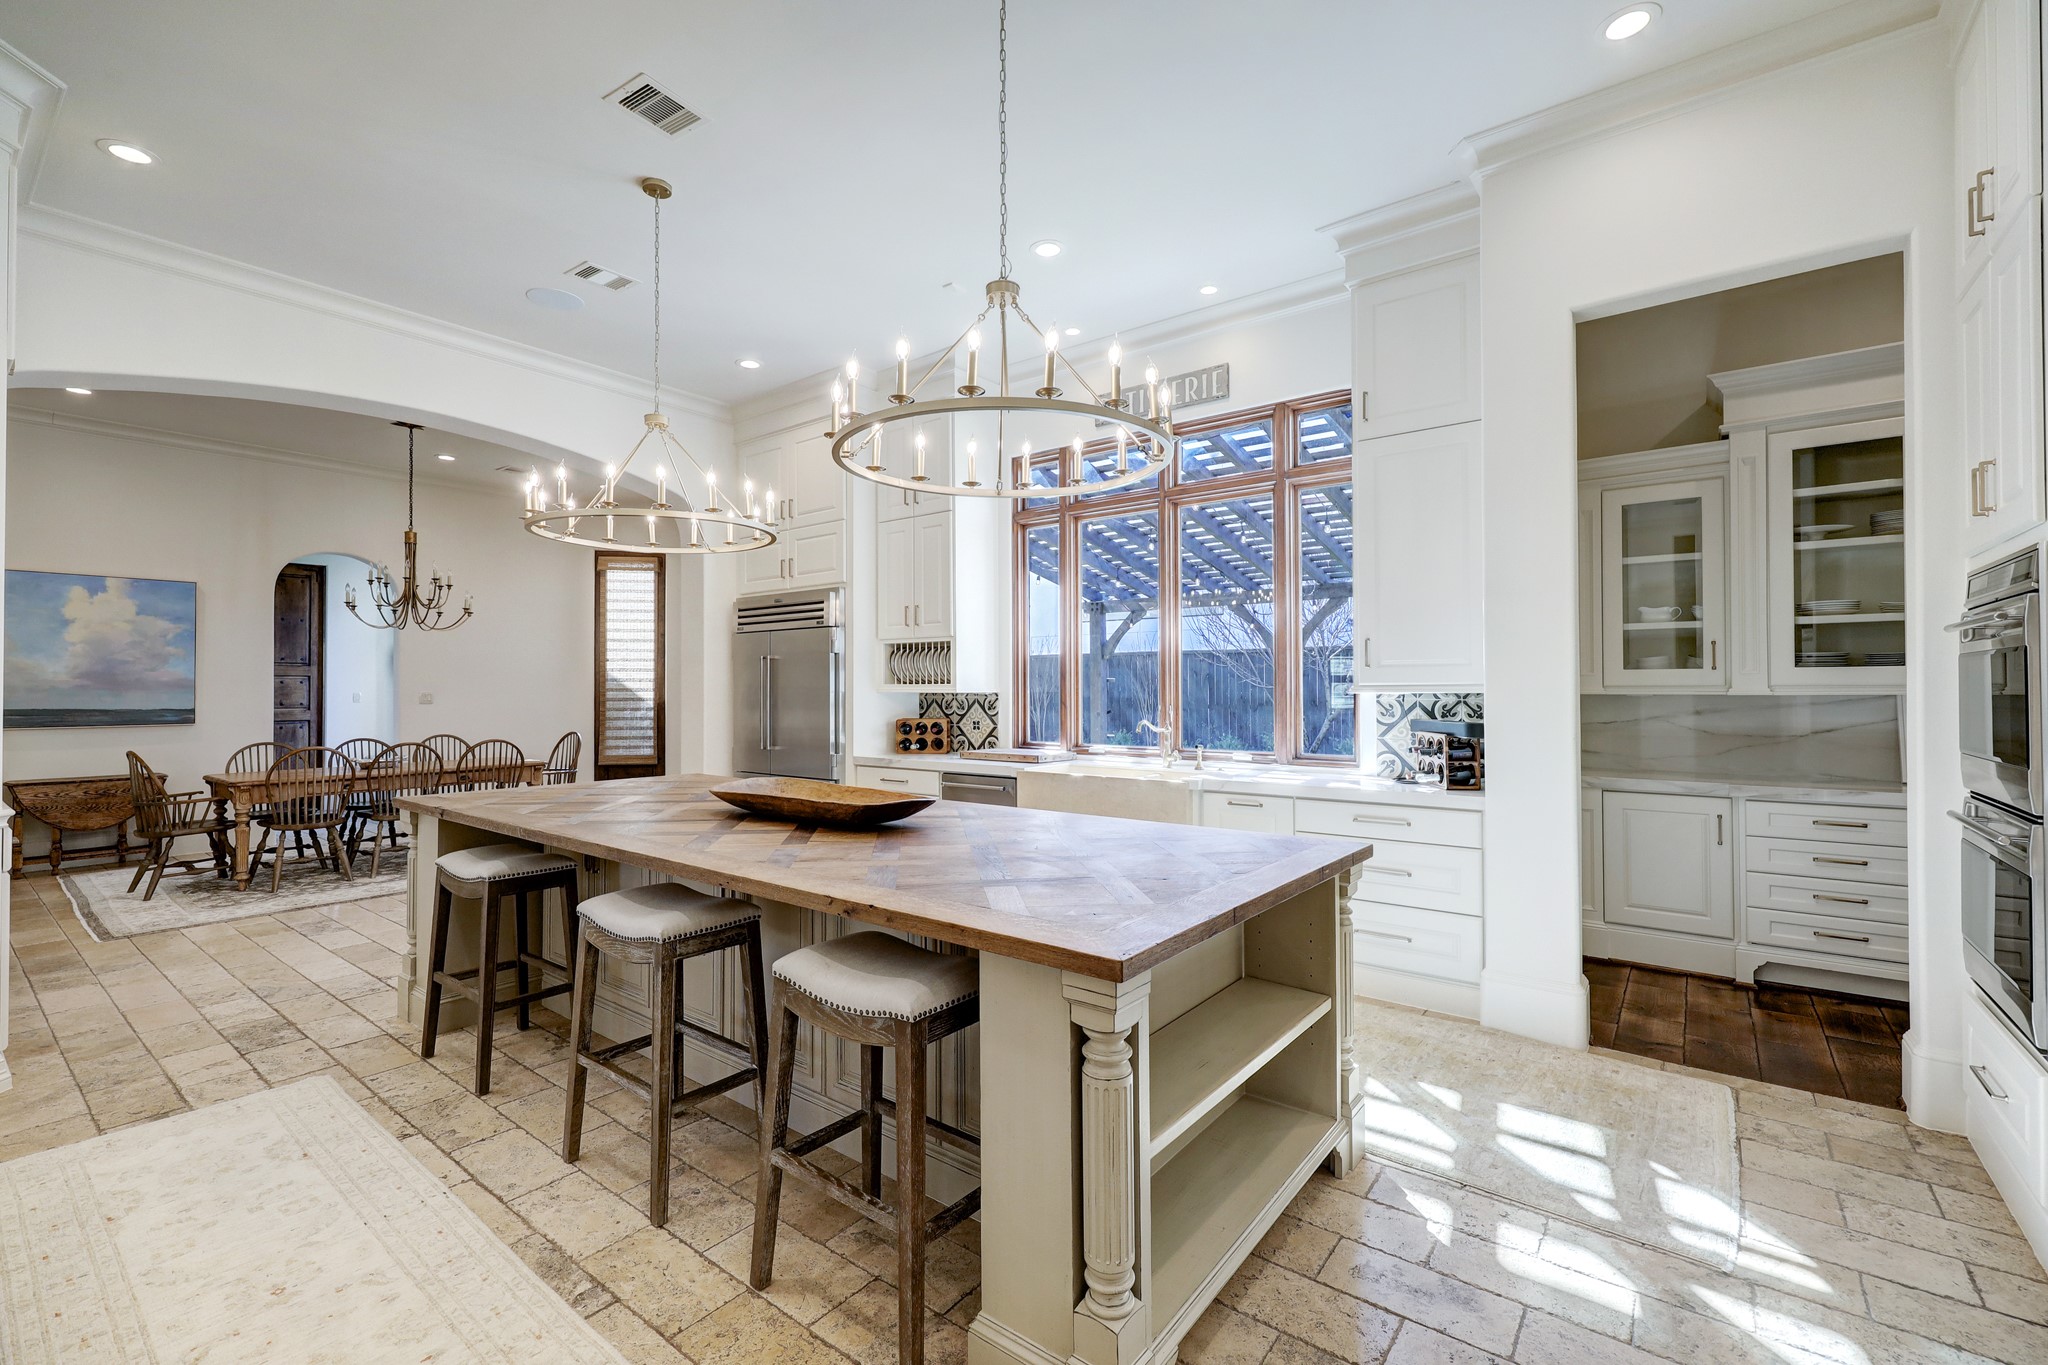 The kitchen is equipped with several impressive features that enhance its functionality and aesthetics. Some notable features include: 6-burner gas range, a walk-in pantry, custom cabinetry, porcelain countertops, double-ovens, and limestone flooring.